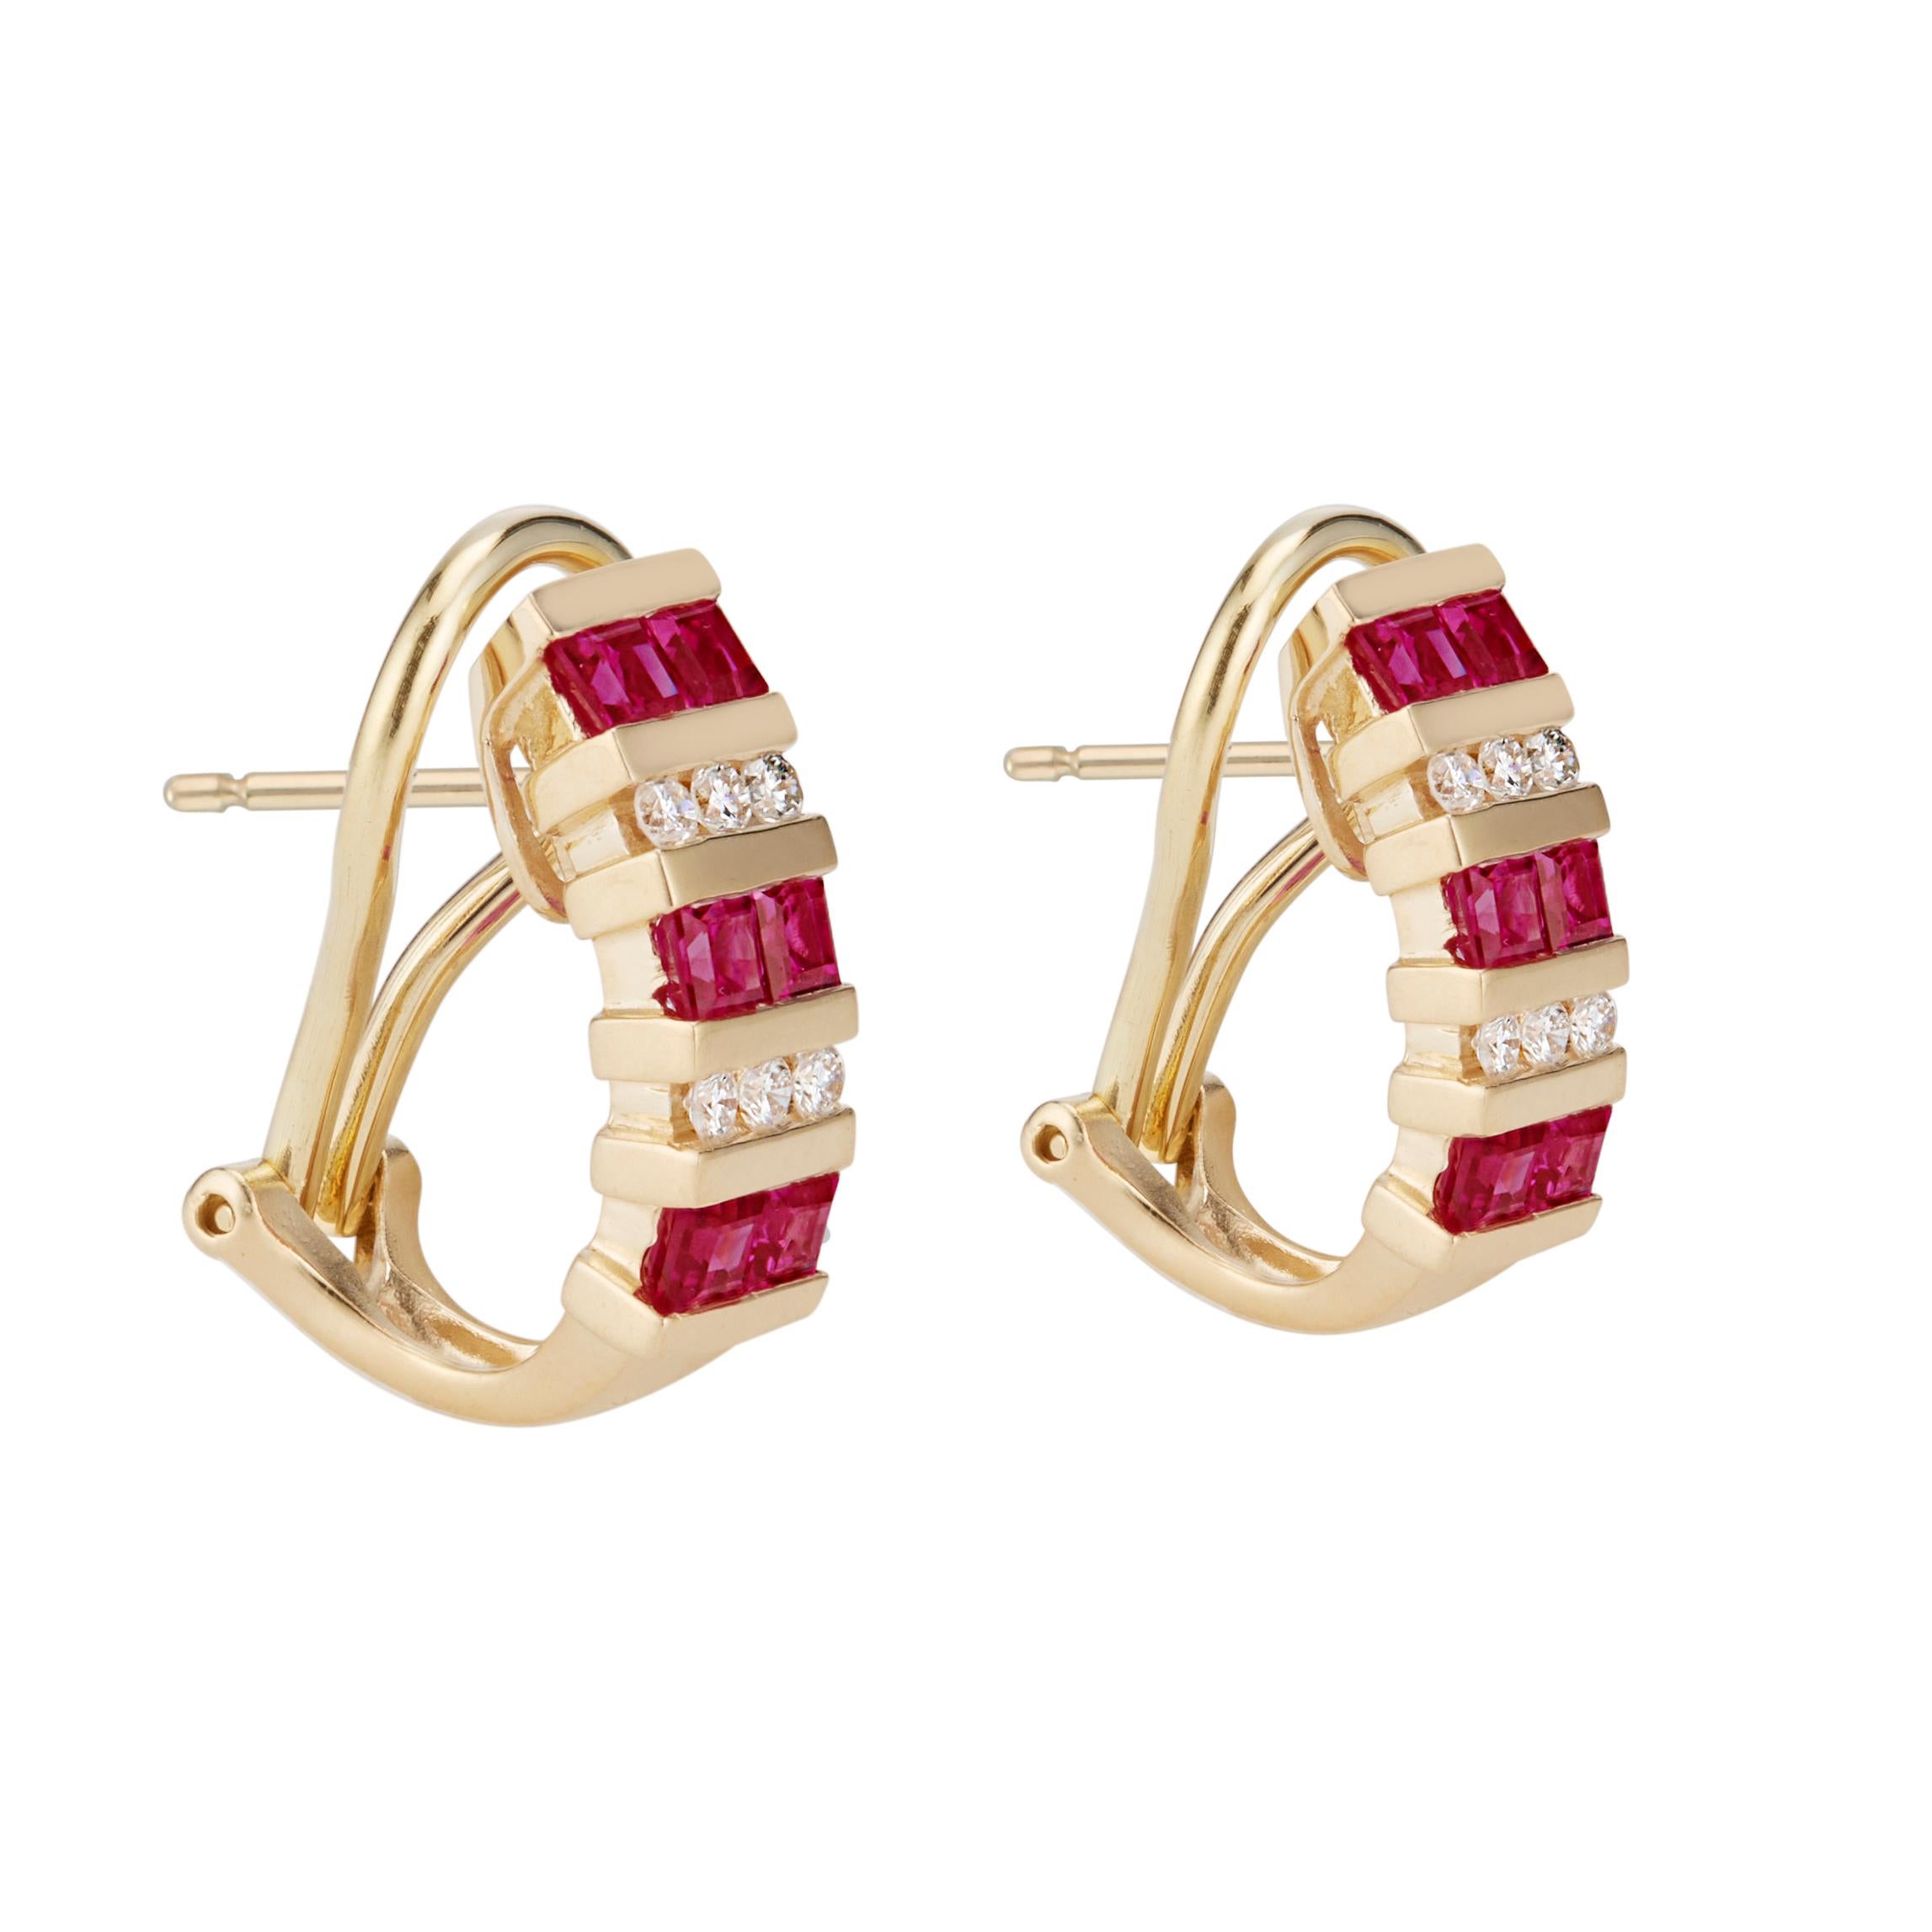 Ruby and diamond earrings. Half hoop style clip post 14k yellow gold settings with 12 channel set step cut square rubies and 12 round brilliant cut diamonds.  

12 round brilliant cut diamonds, G VS approx. .20cts
12 step cut square red rubies,